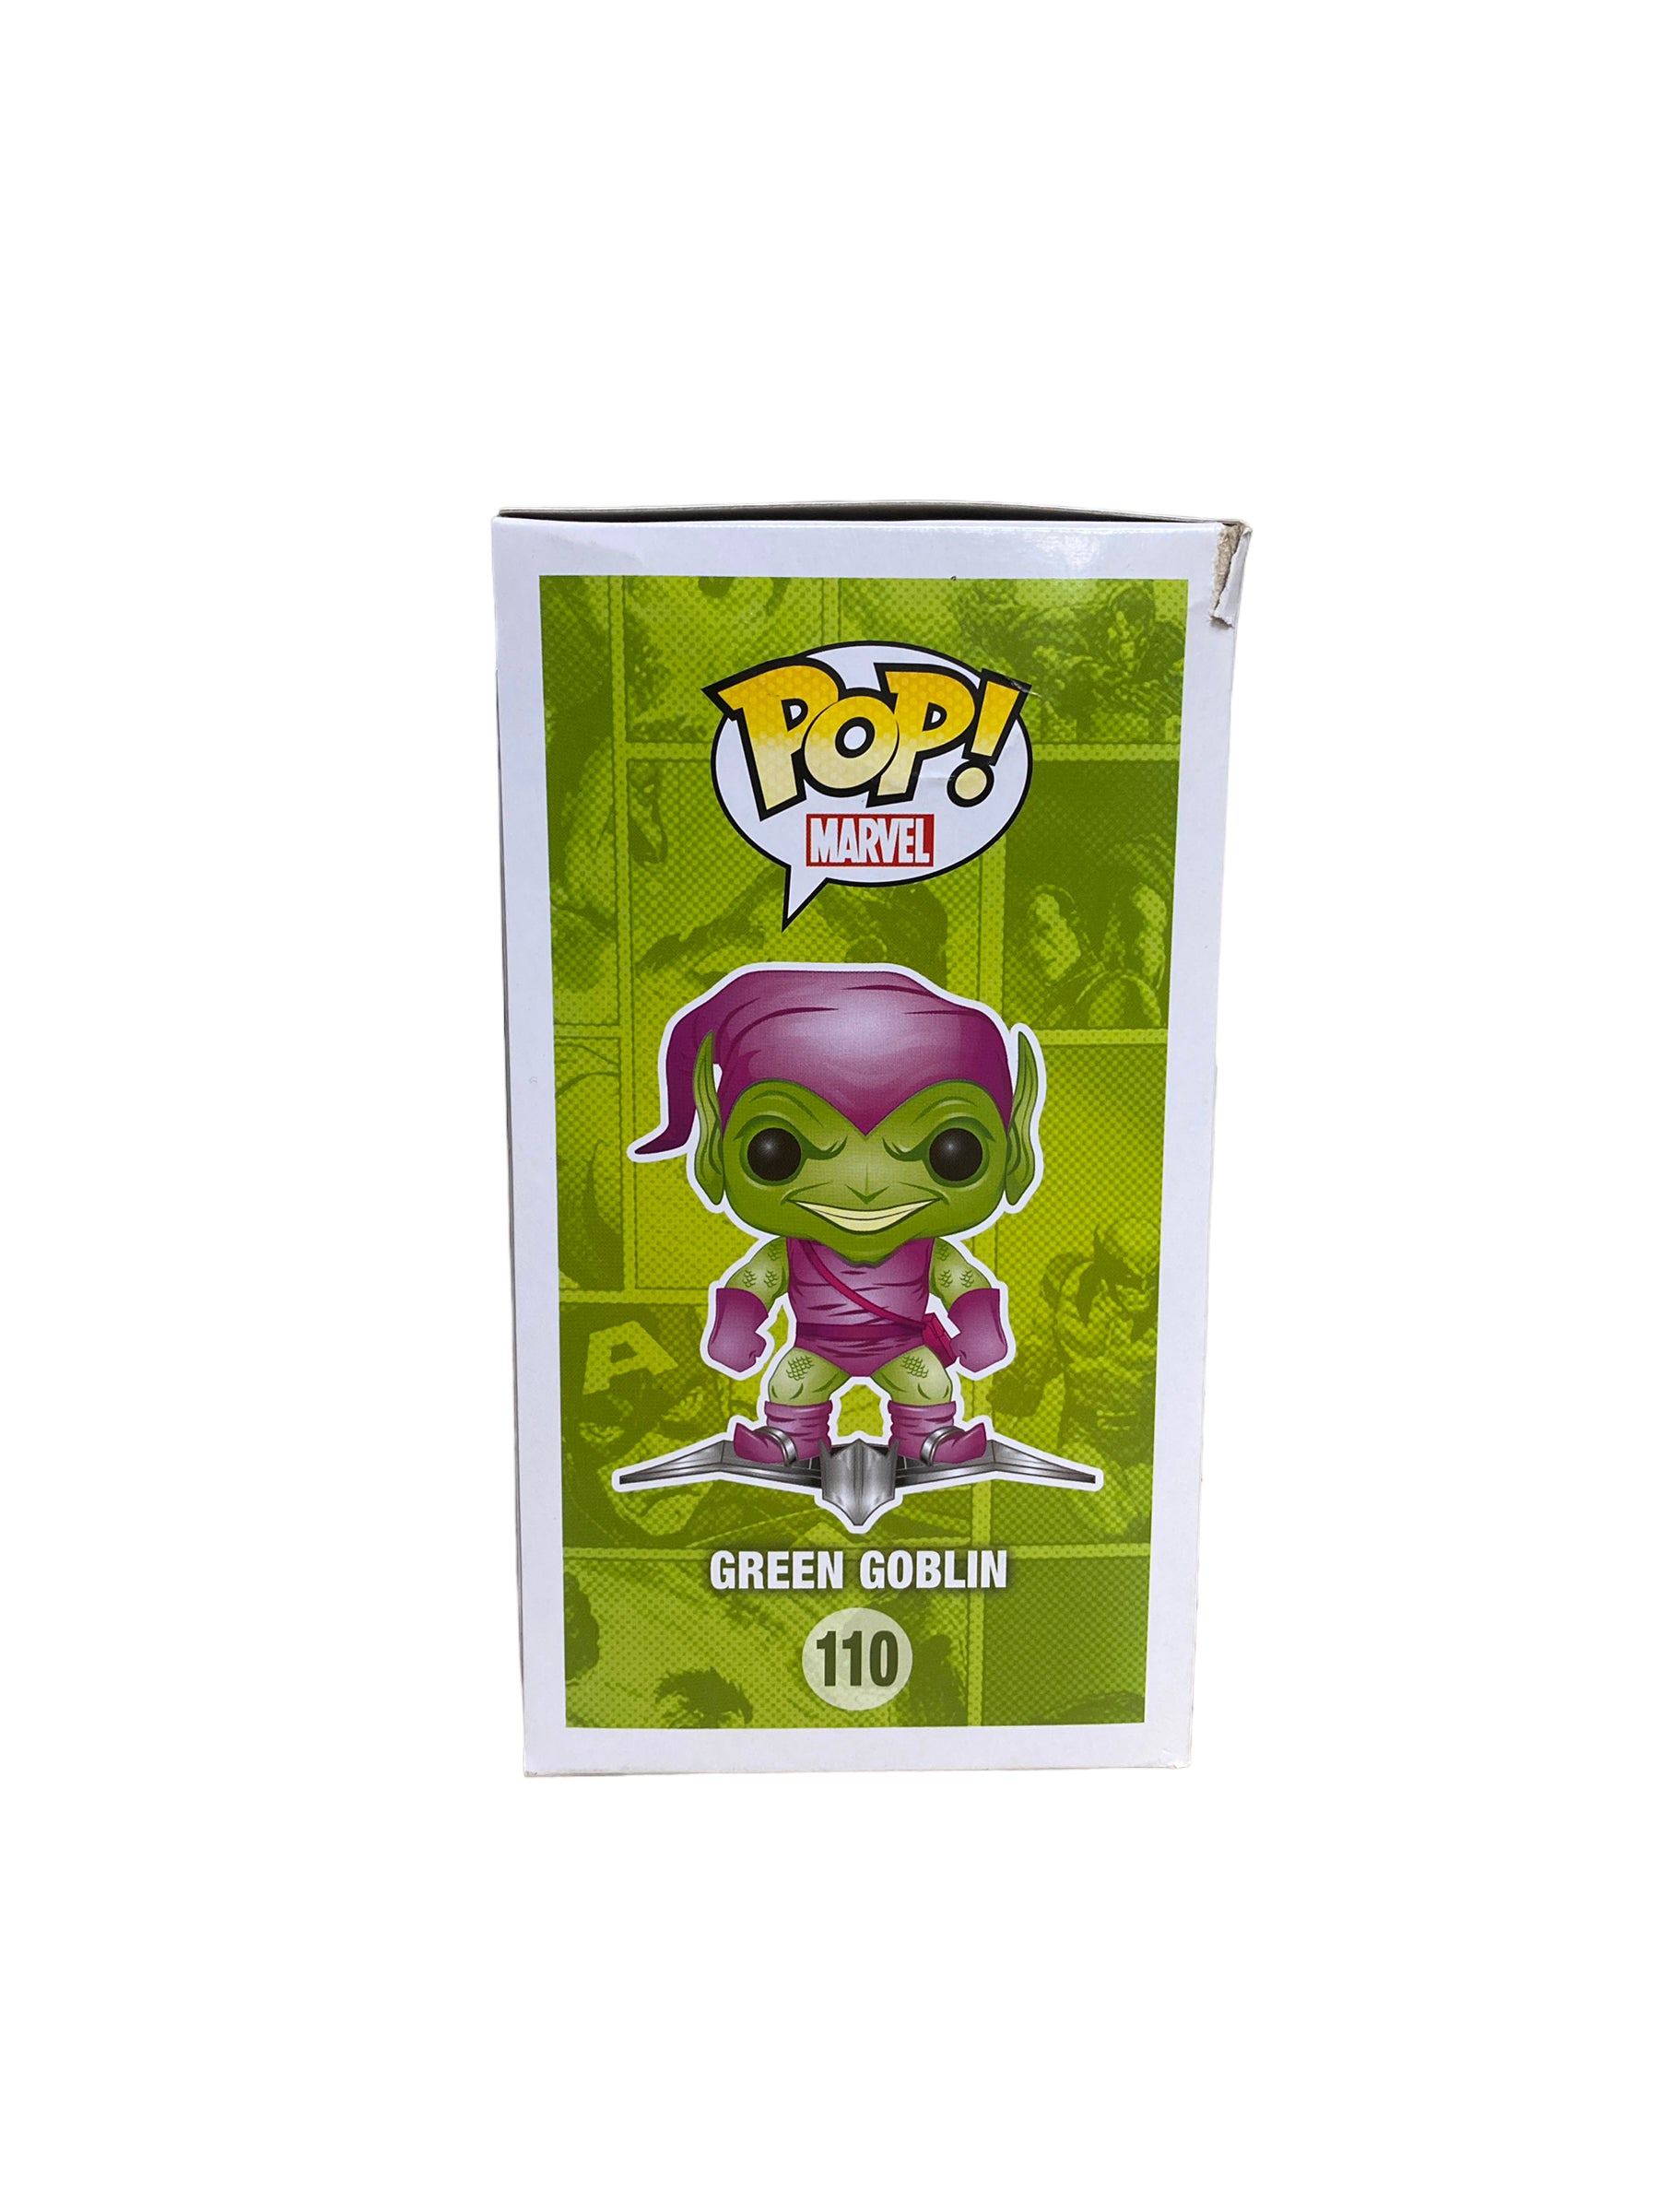 Green Goblin #110 (w/ Glider, Glitter Glow) Funko Pop! - Marvel - SDCC 2016 Official Convention Exclusive - Condition 7/10